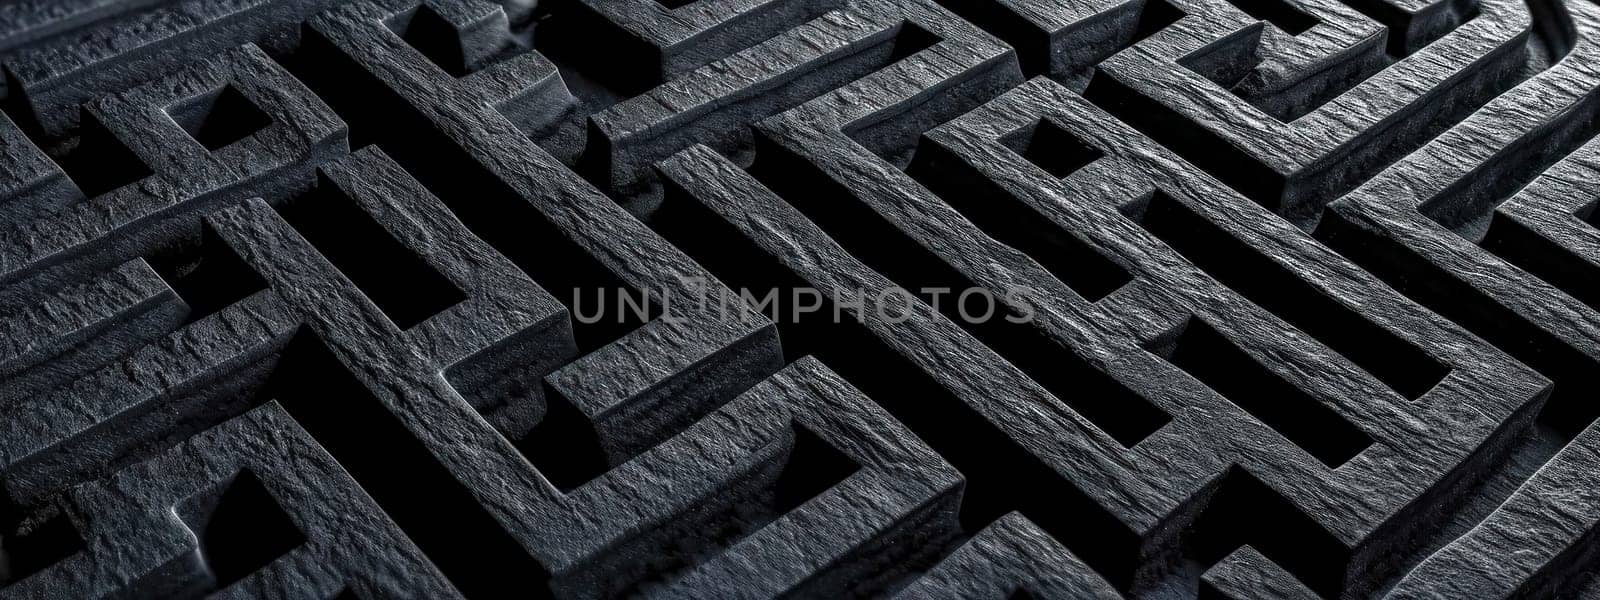 maze with a dark, textured surface, creating a sense of complexity and challenge. by Edophoto